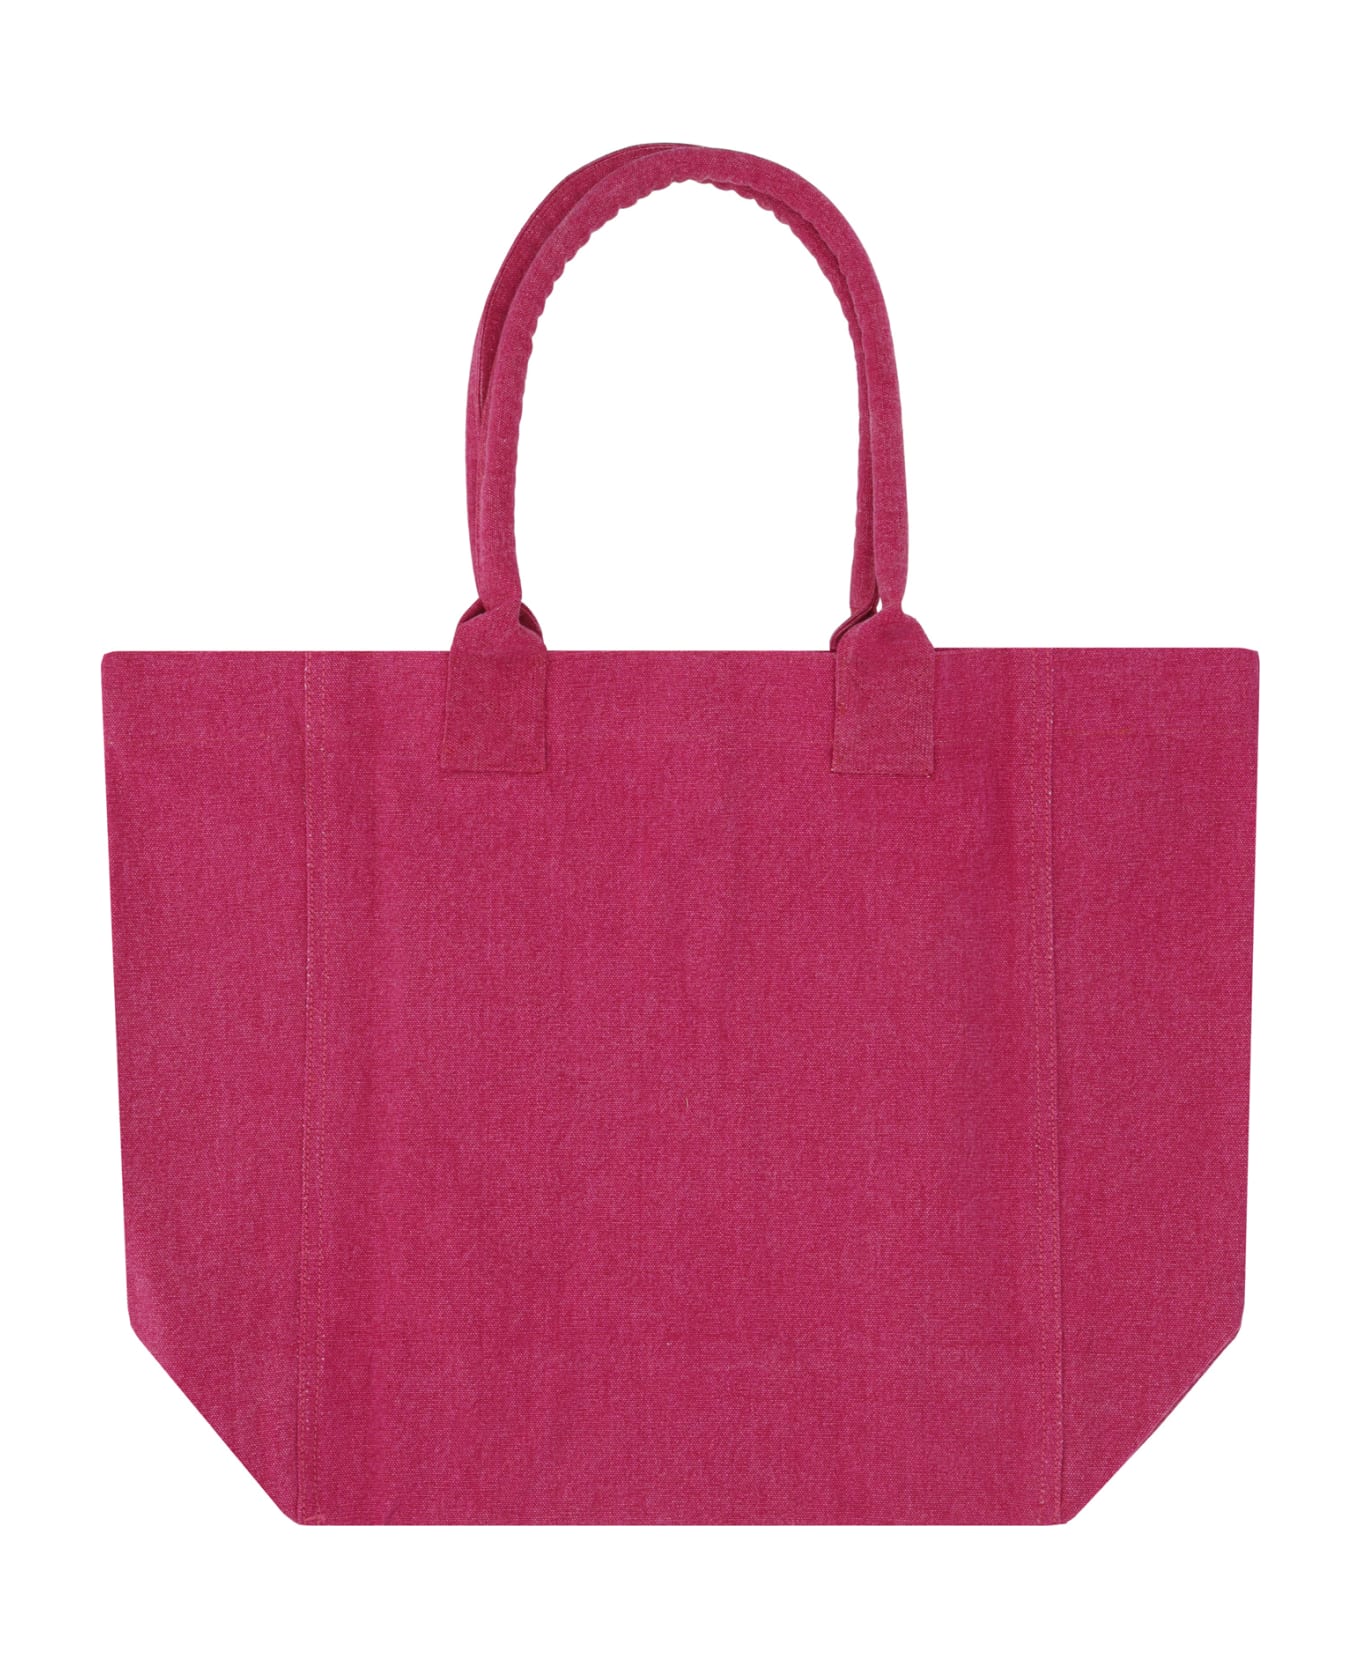 Isabel Marant Yenky Tote Bag - Pink トートバッグ